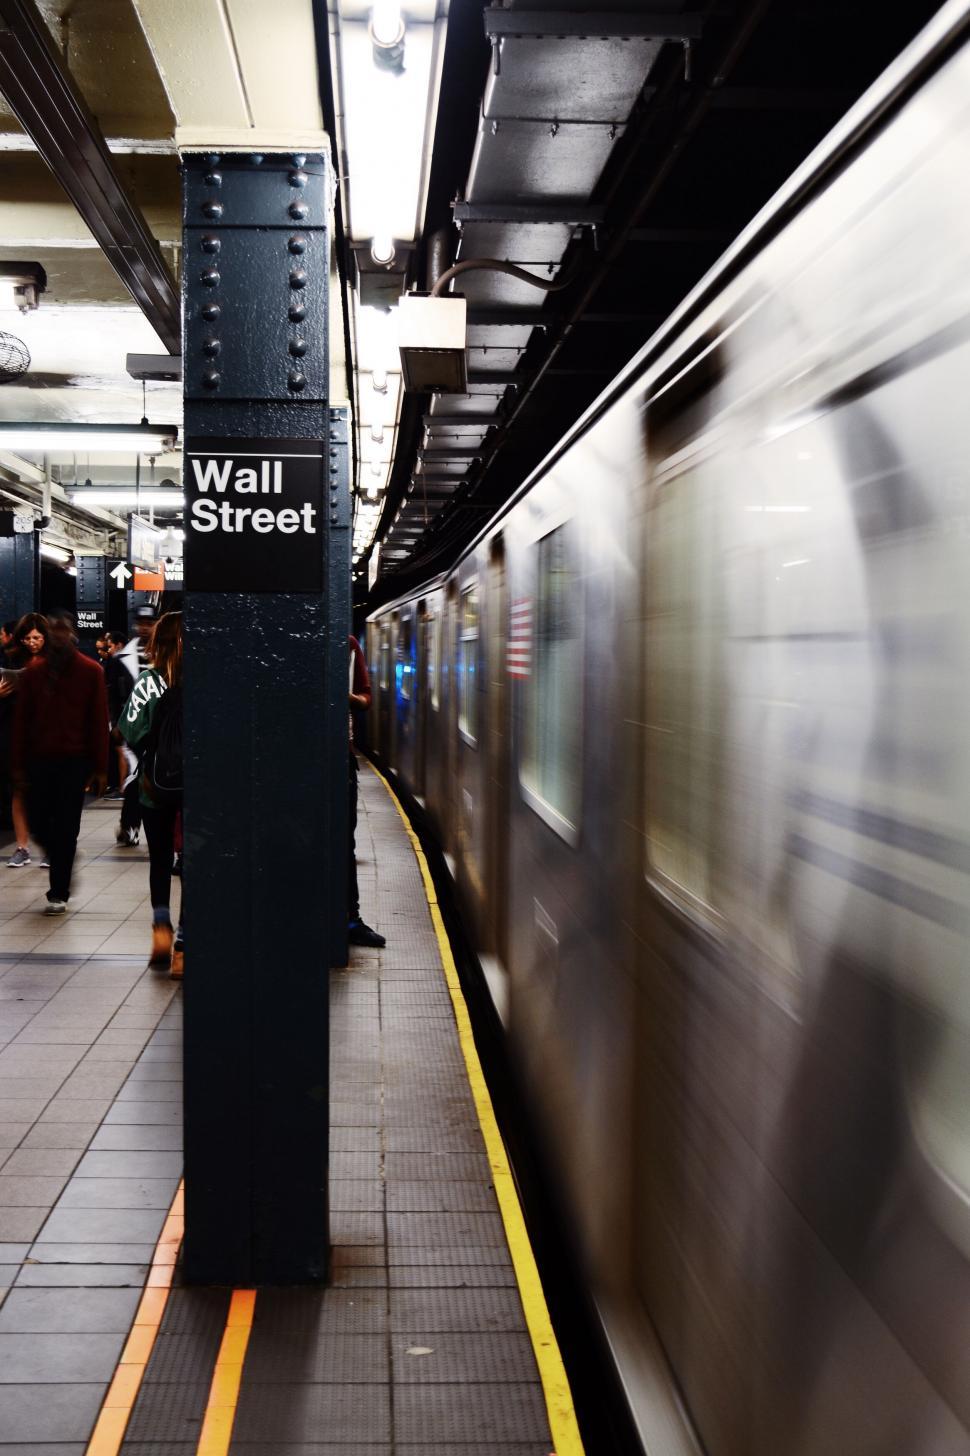 Free Image of Wall Street subway sign and passing train 